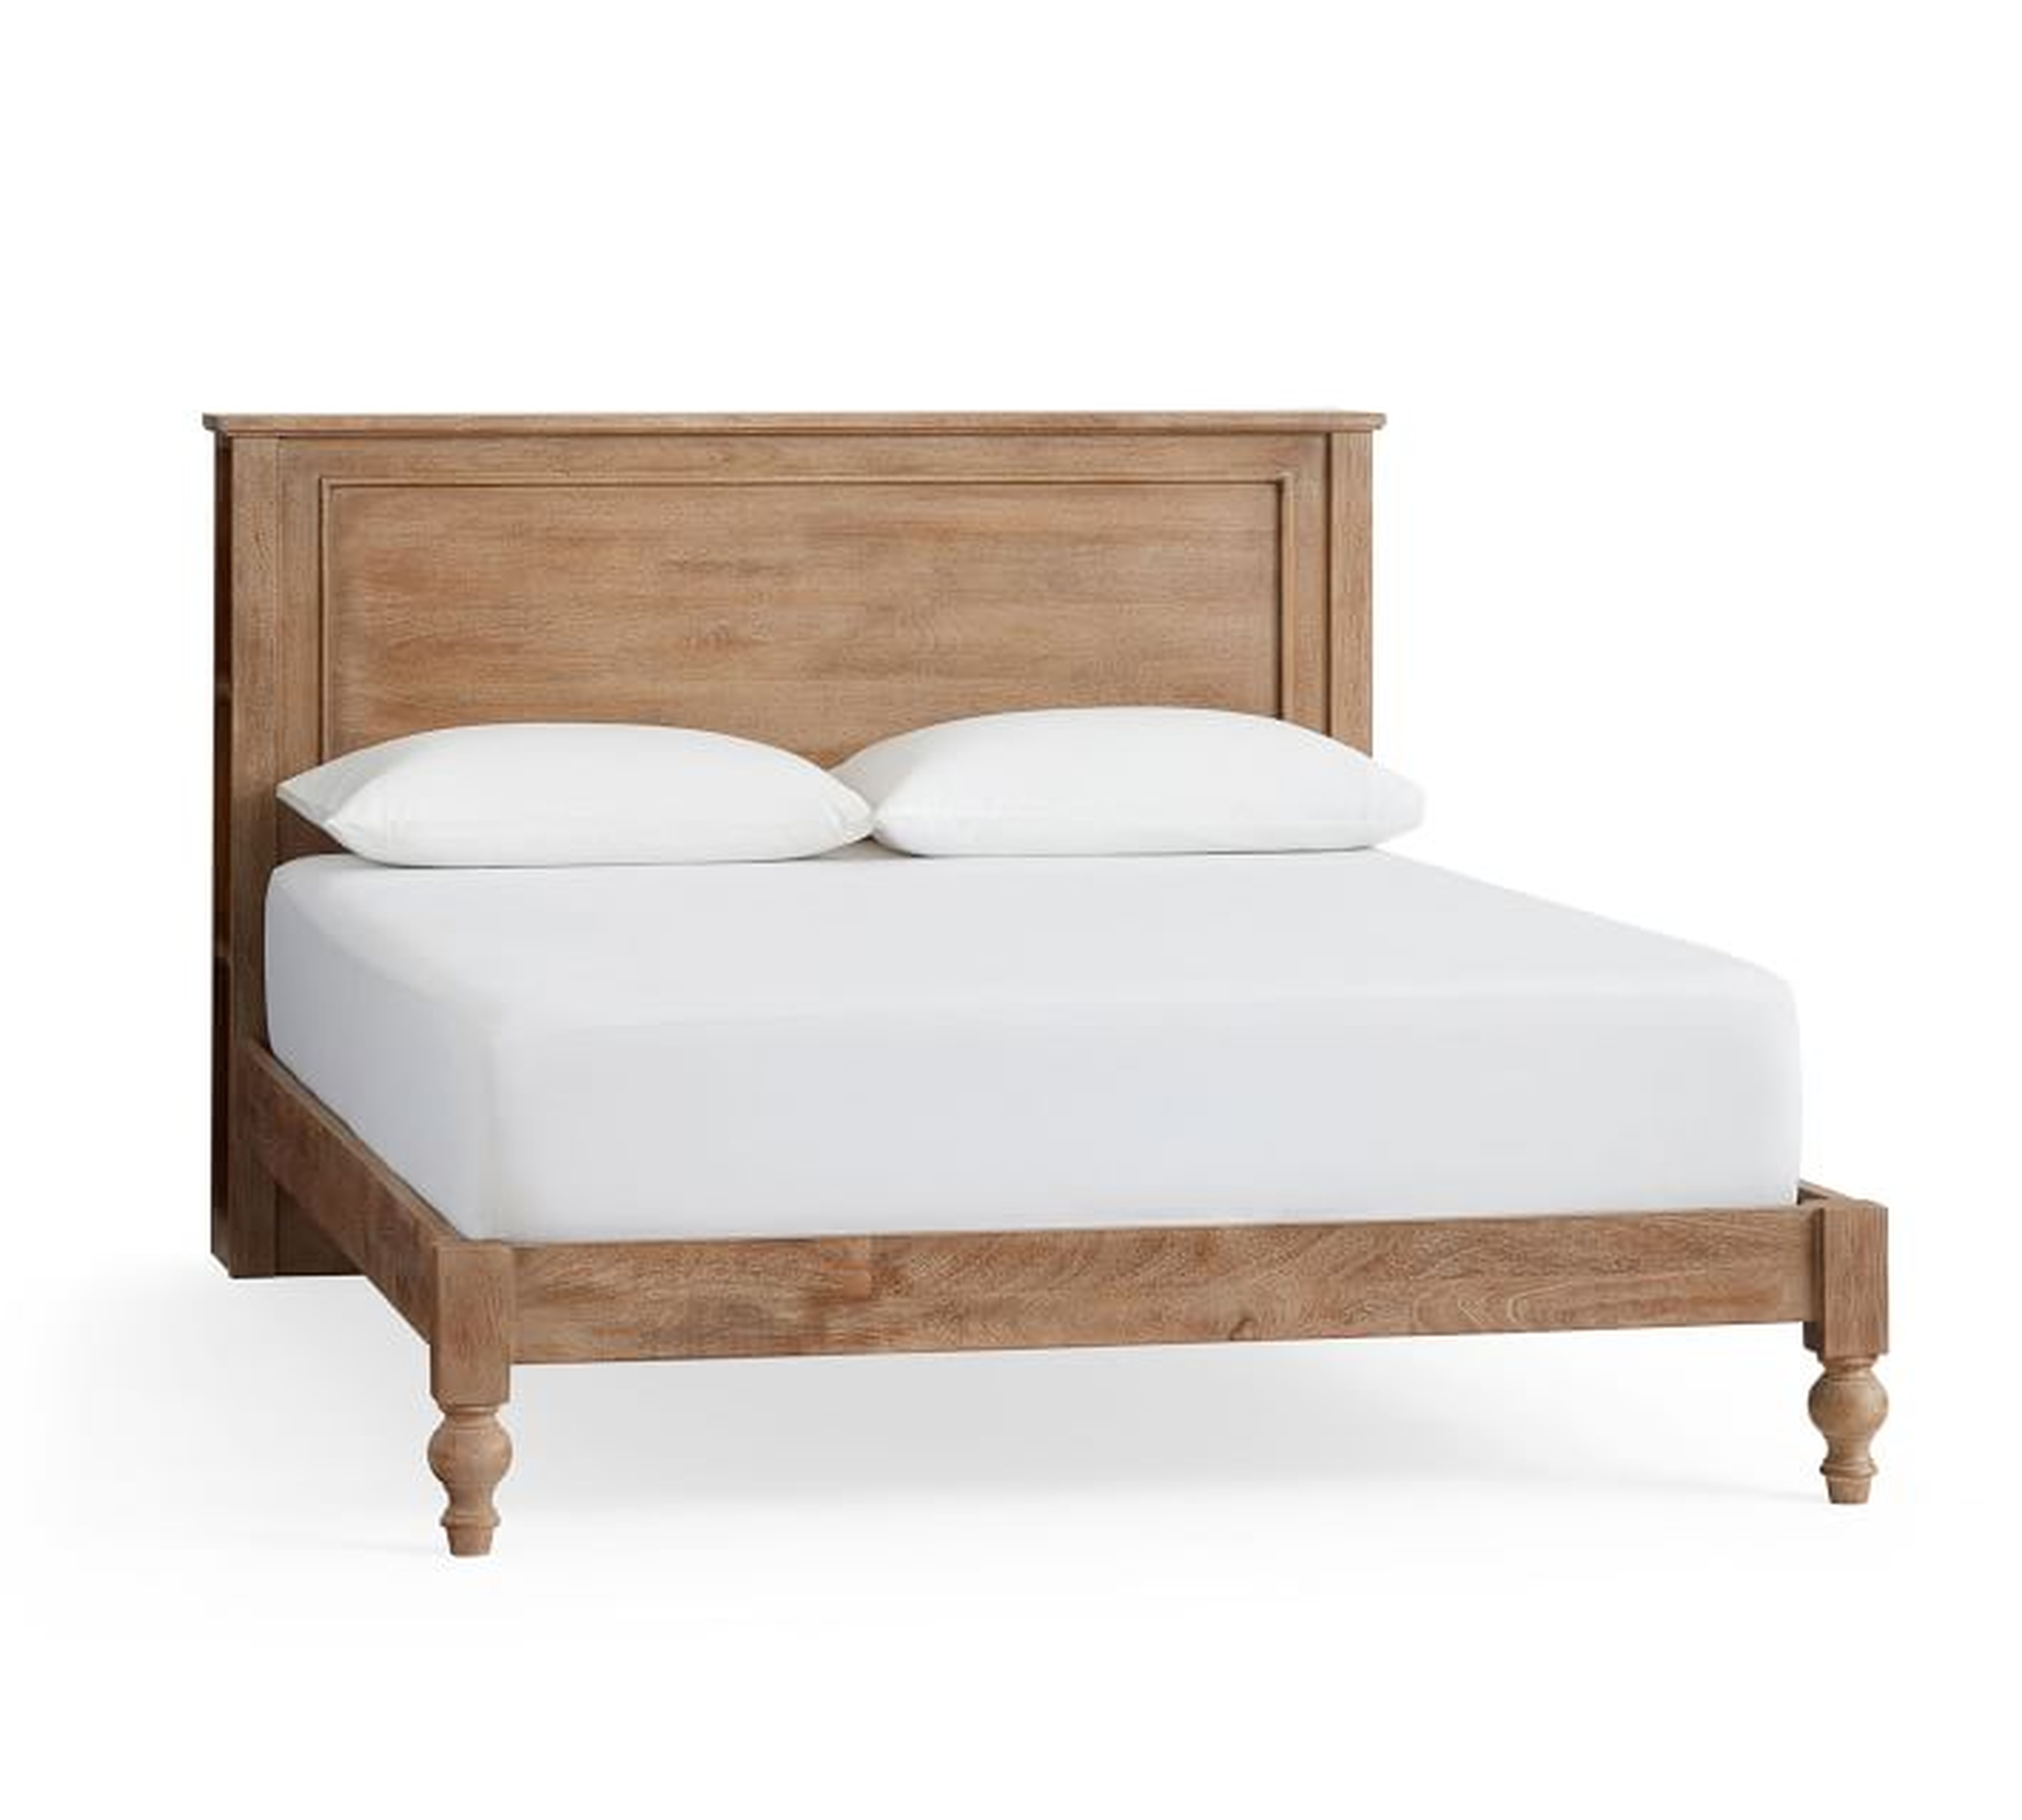 Astoria Storage Bed, Rosedale Brown, Queen - Pottery Barn